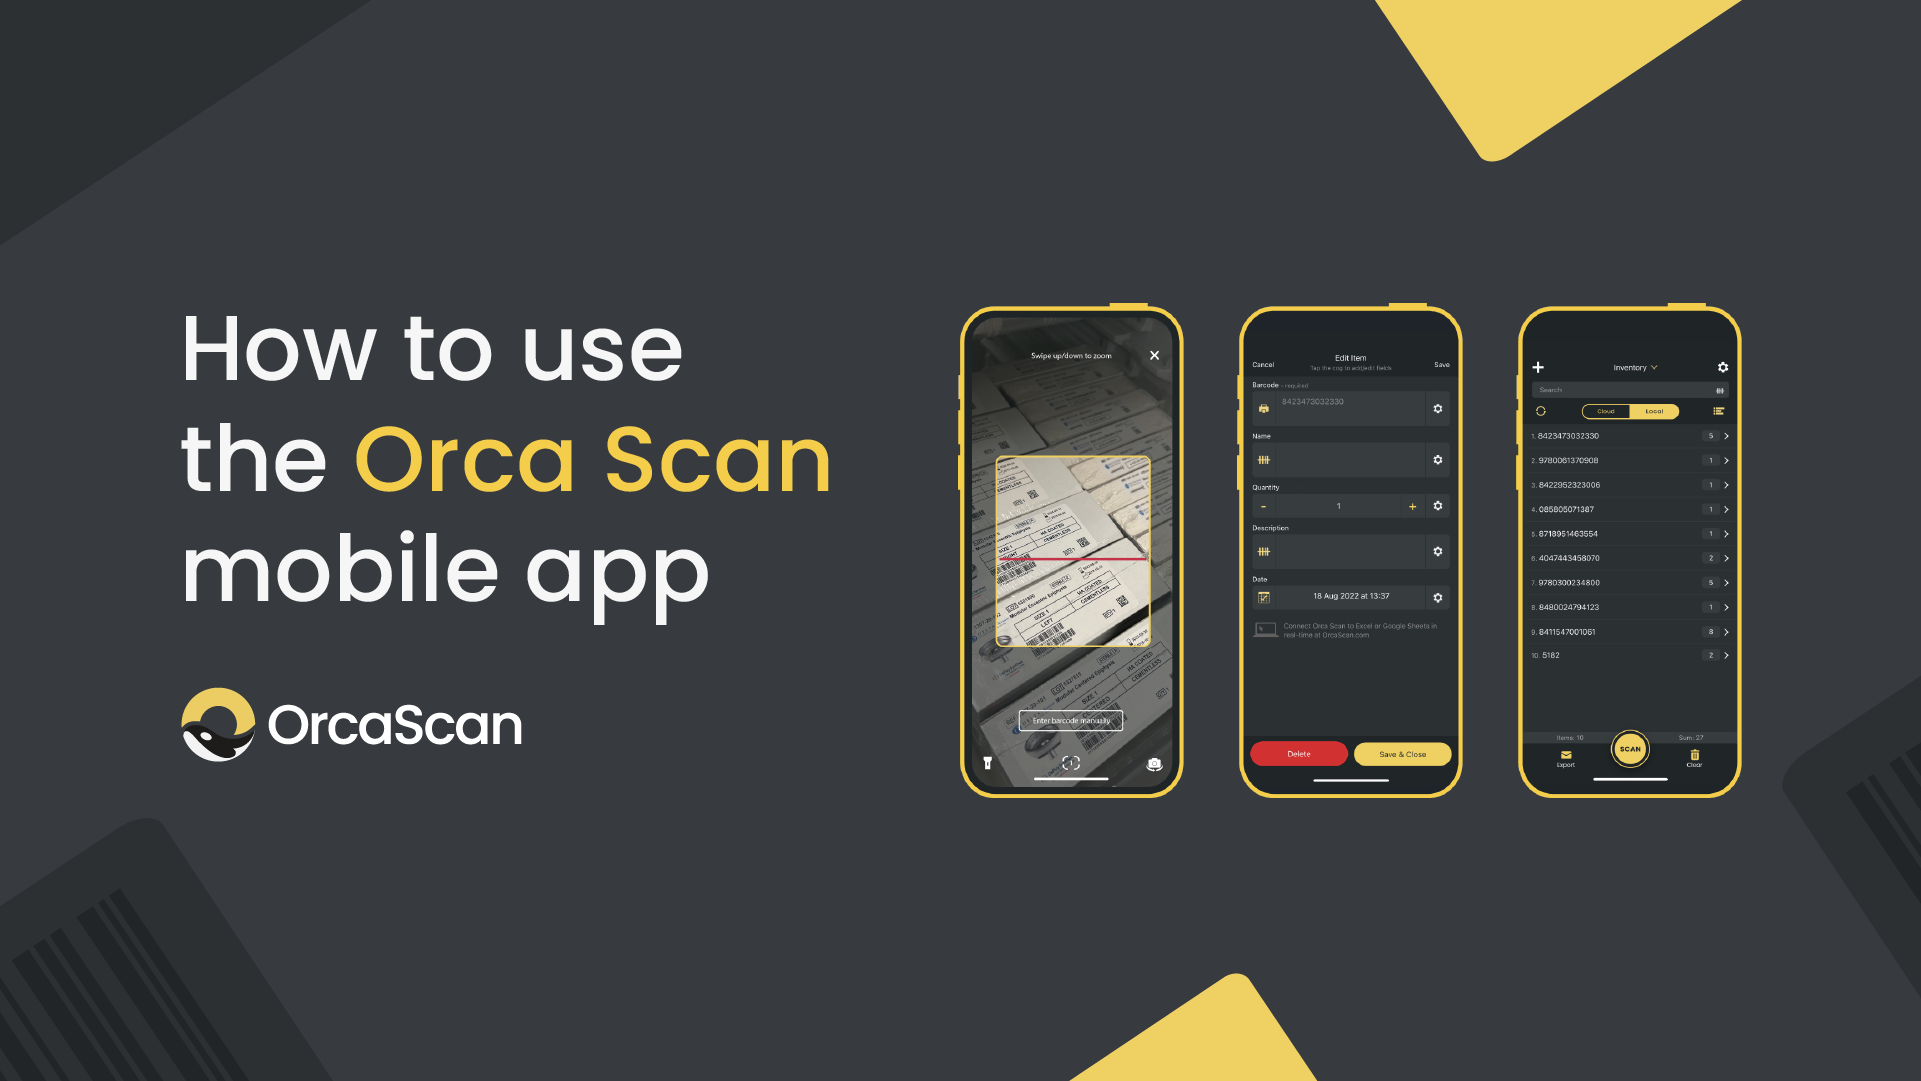 How to use the Orca Scan mobile app